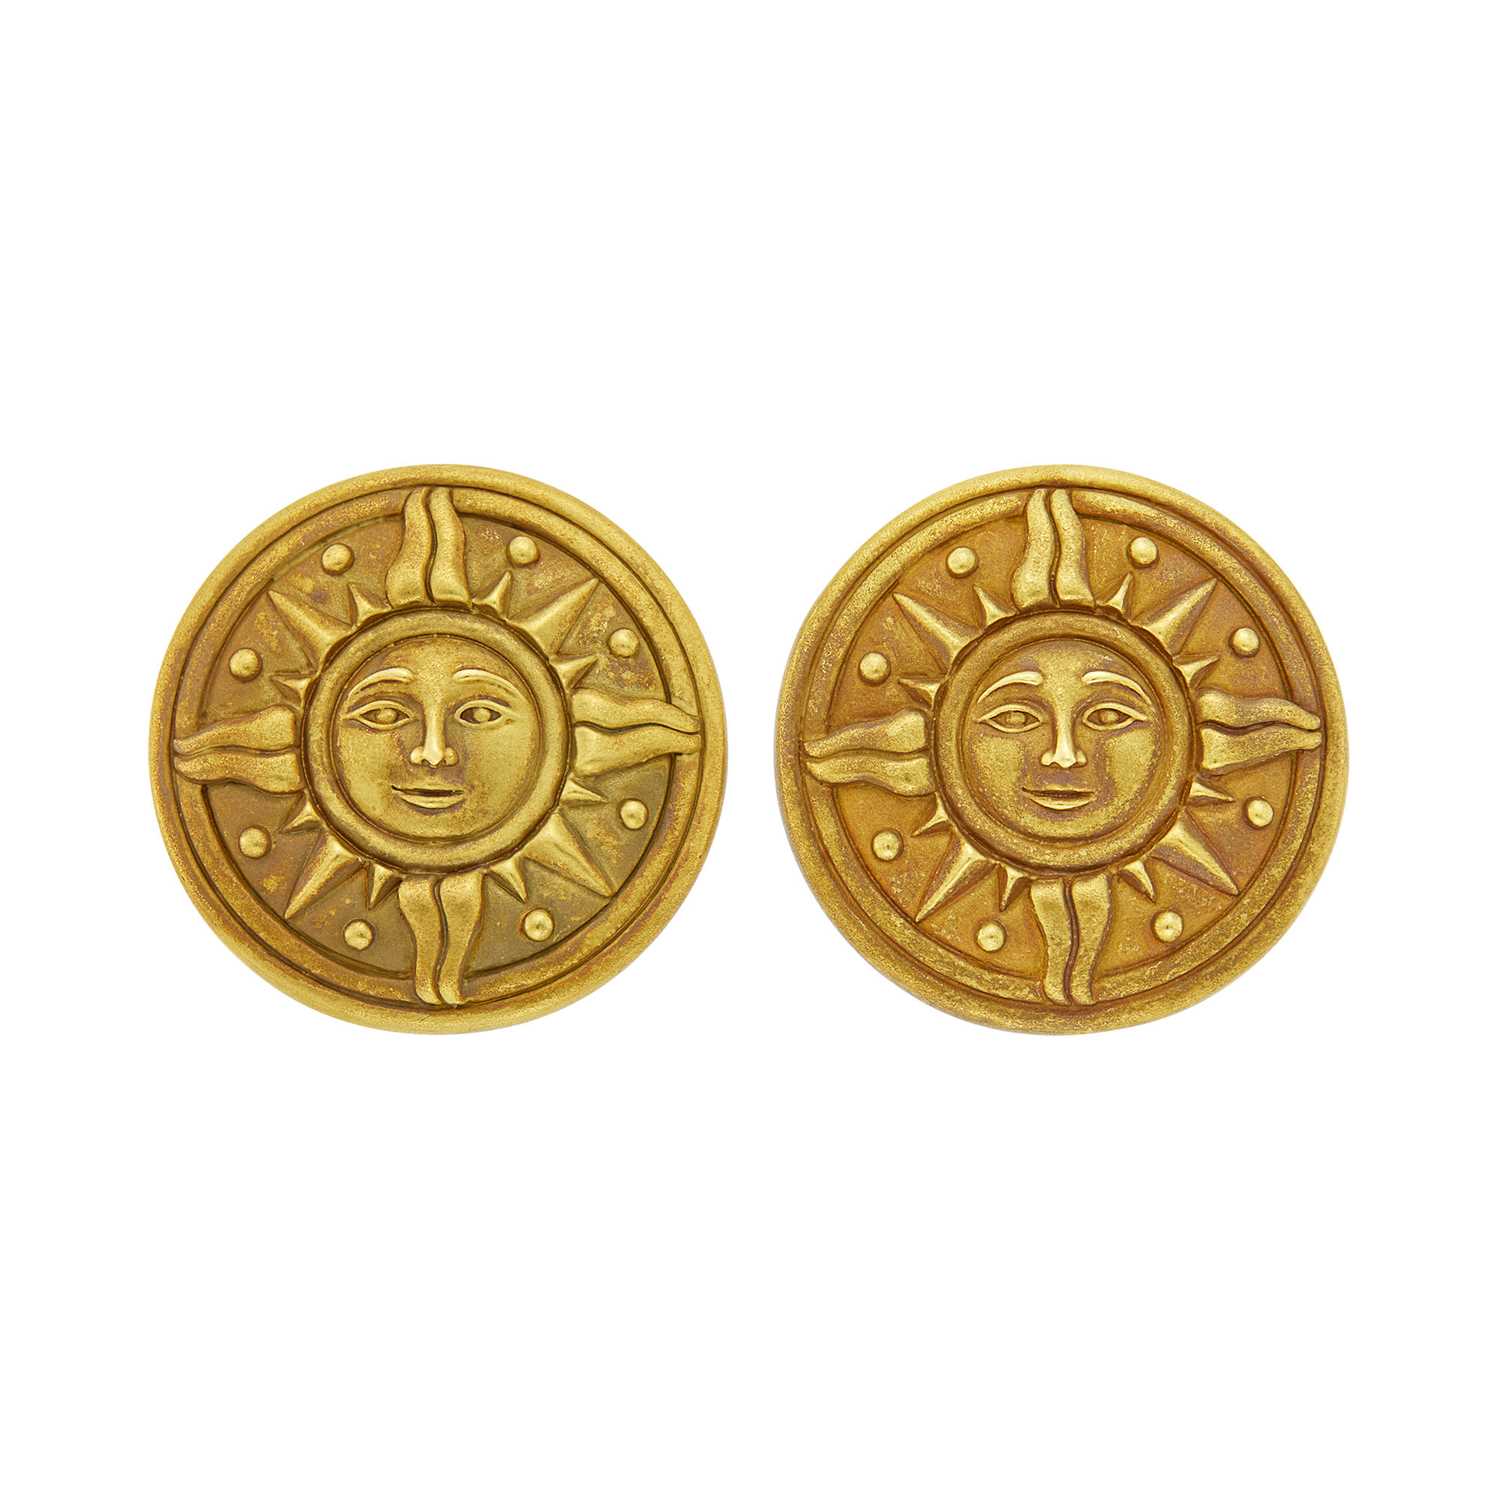 Lot 169 - Barry Kieselstein-Cord Pair of Gold Sun Button Earclips